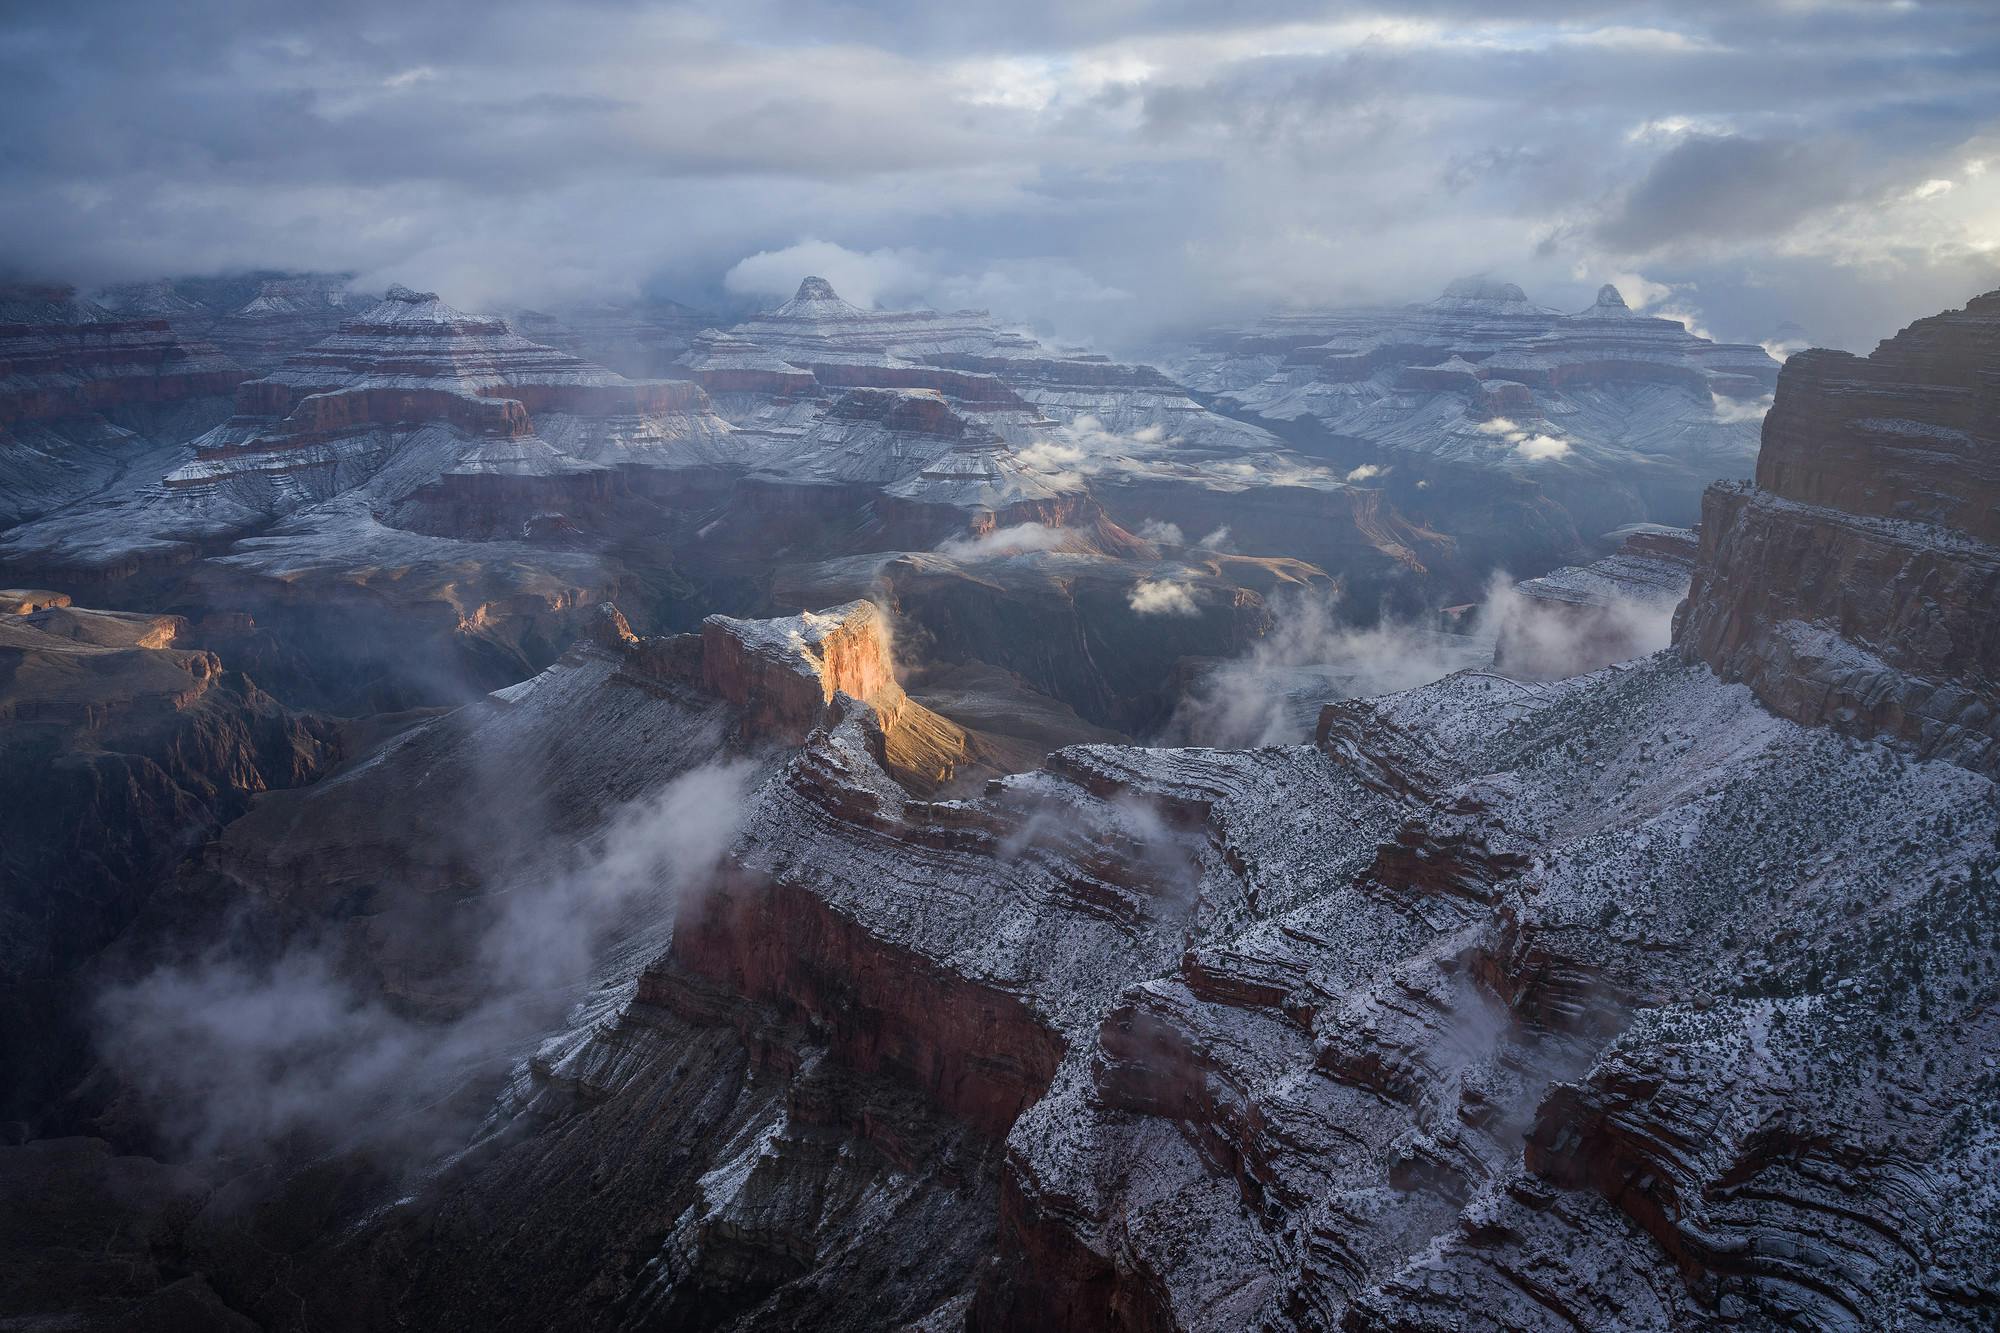 Clearing Winter Storm at the Grand Canyon